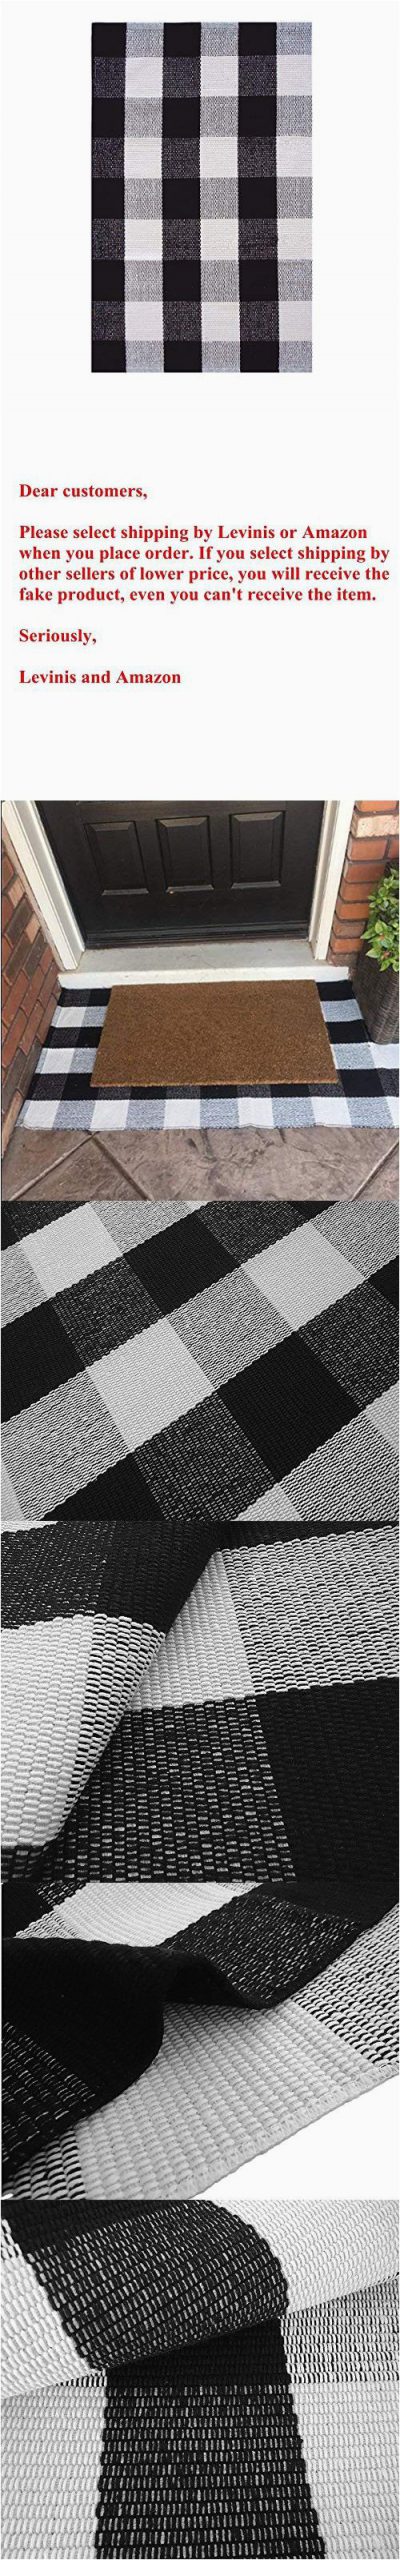 Black and White Checkered Bathroom Rug Black and White Plaid Rug Cotton Porch Rugs Hand Woven